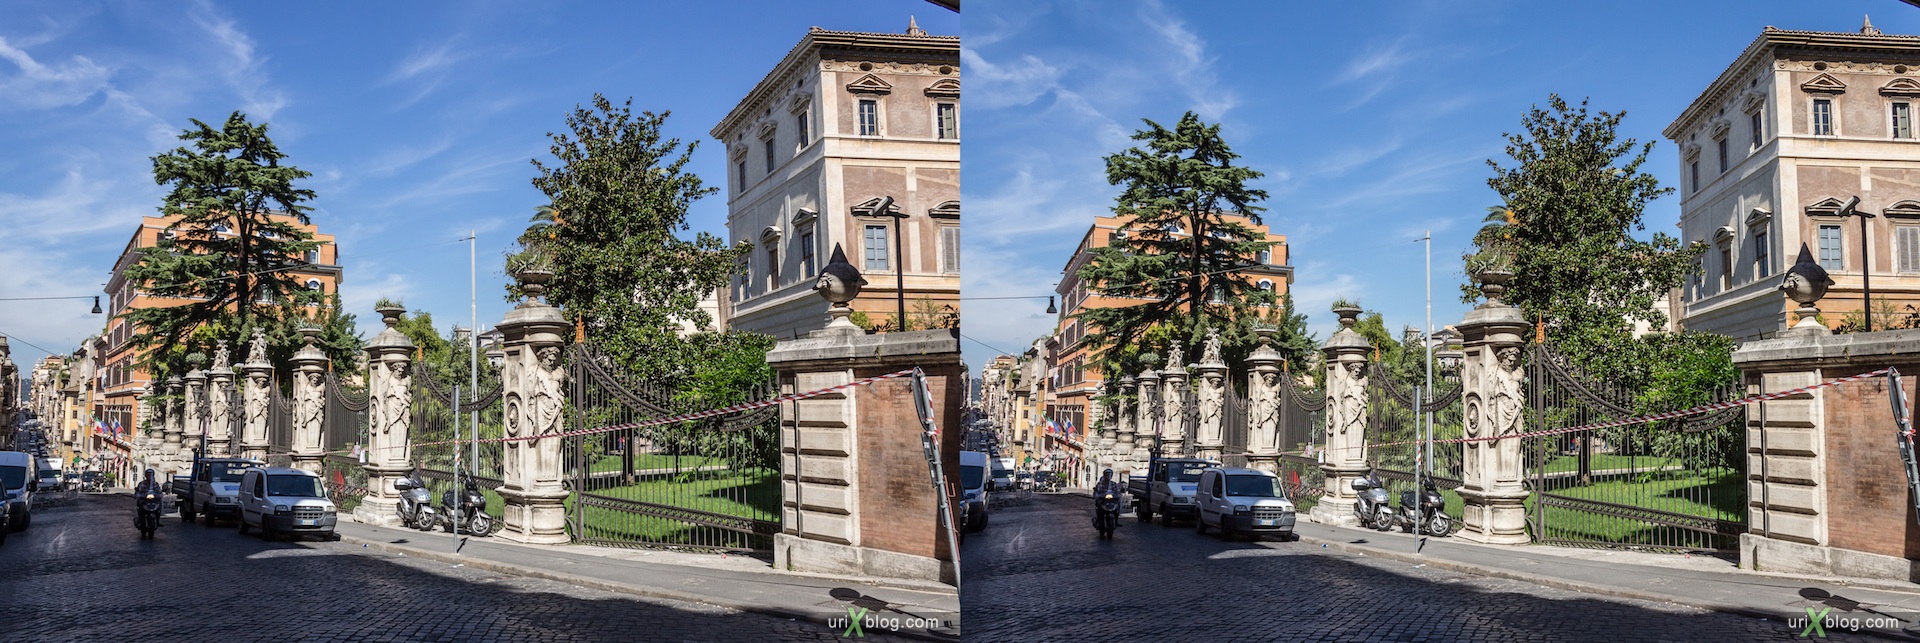 2012, fence, Barberini palace, Palazzo Barberini, Via delle Quattro Fontane street,Rome, Italy, Europe, 3D, stereo pair, cross-eyed, crossview, cross view stereo pair